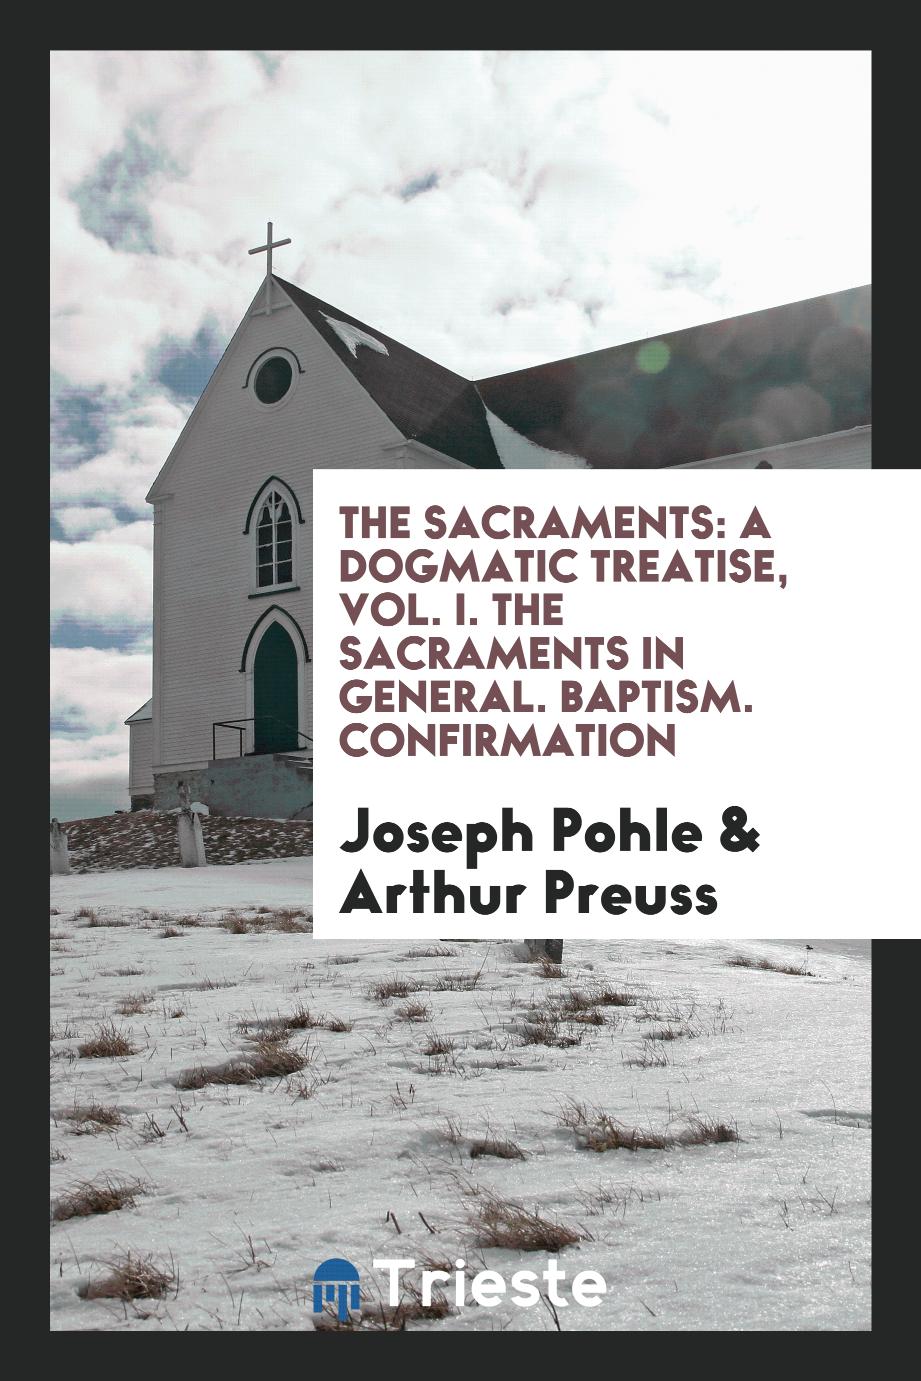 The Sacraments: A Dogmatic Treatise, Vol. I. The Sacraments in General. Baptism. Confirmation